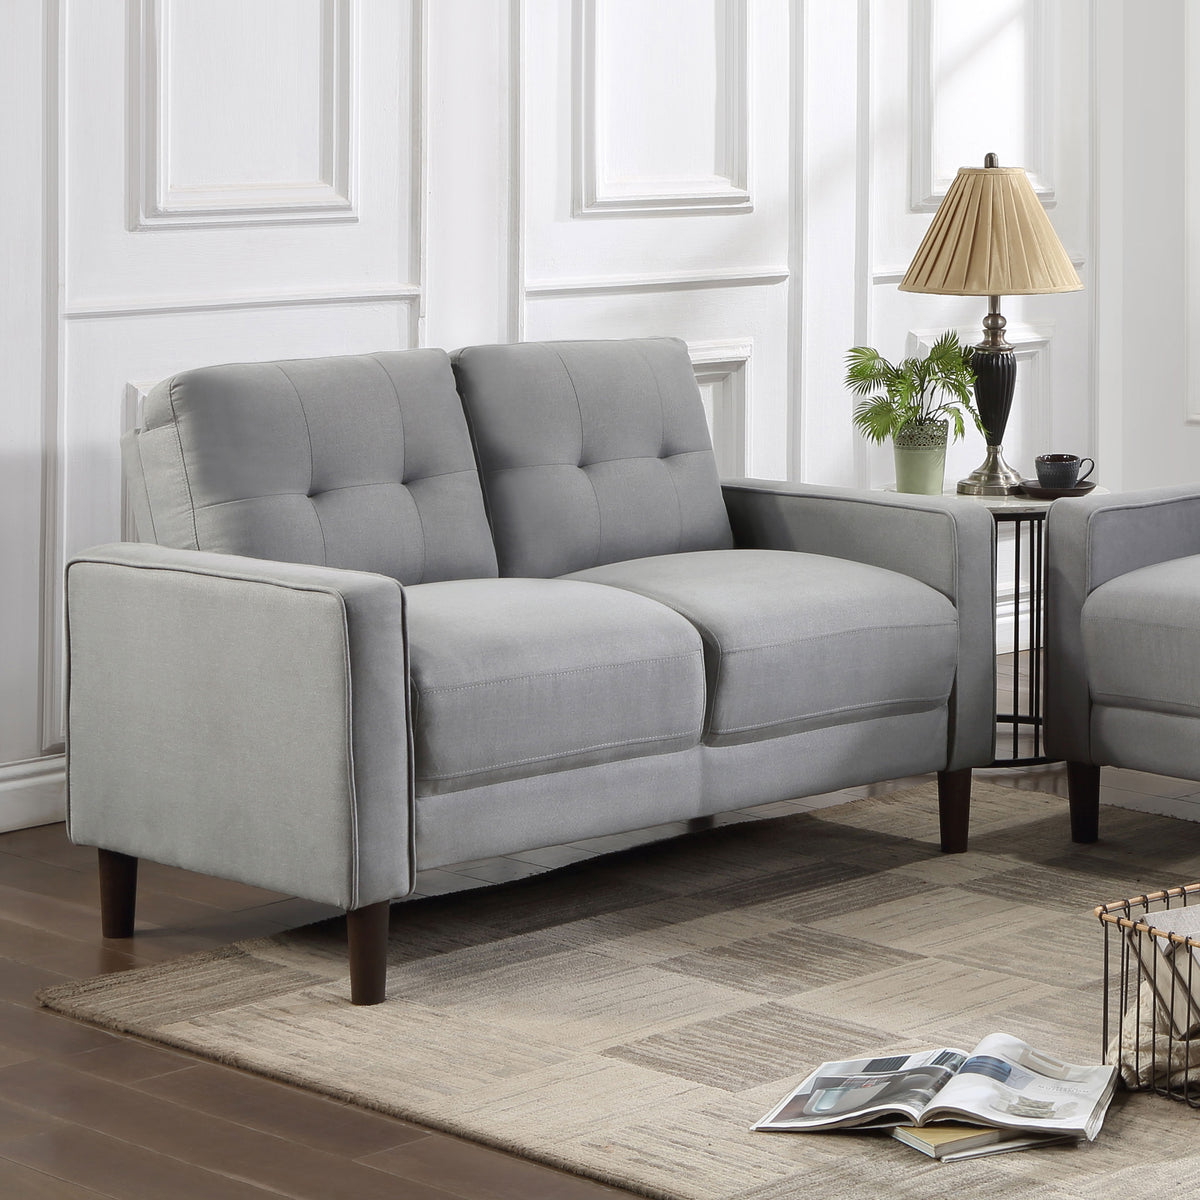 Bowen Upholstered Track Arms Tufted Loveseat  Las Vegas Furniture Stores